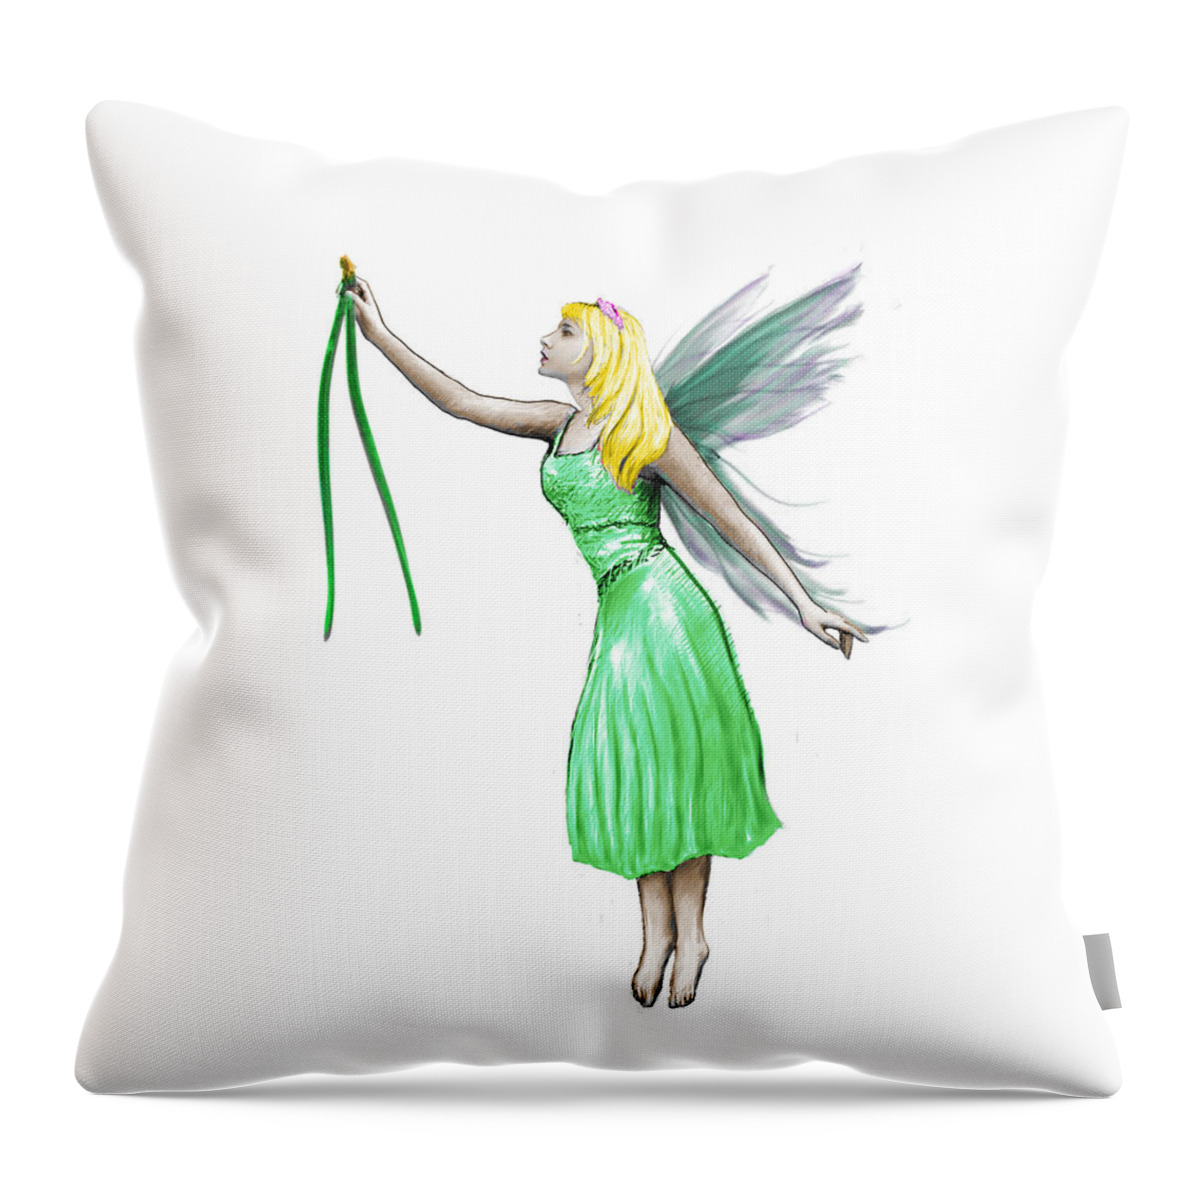 Fairy Throw Pillow featuring the digital art Pine Tree Fairy holding pine needles by Yuichi Tanabe